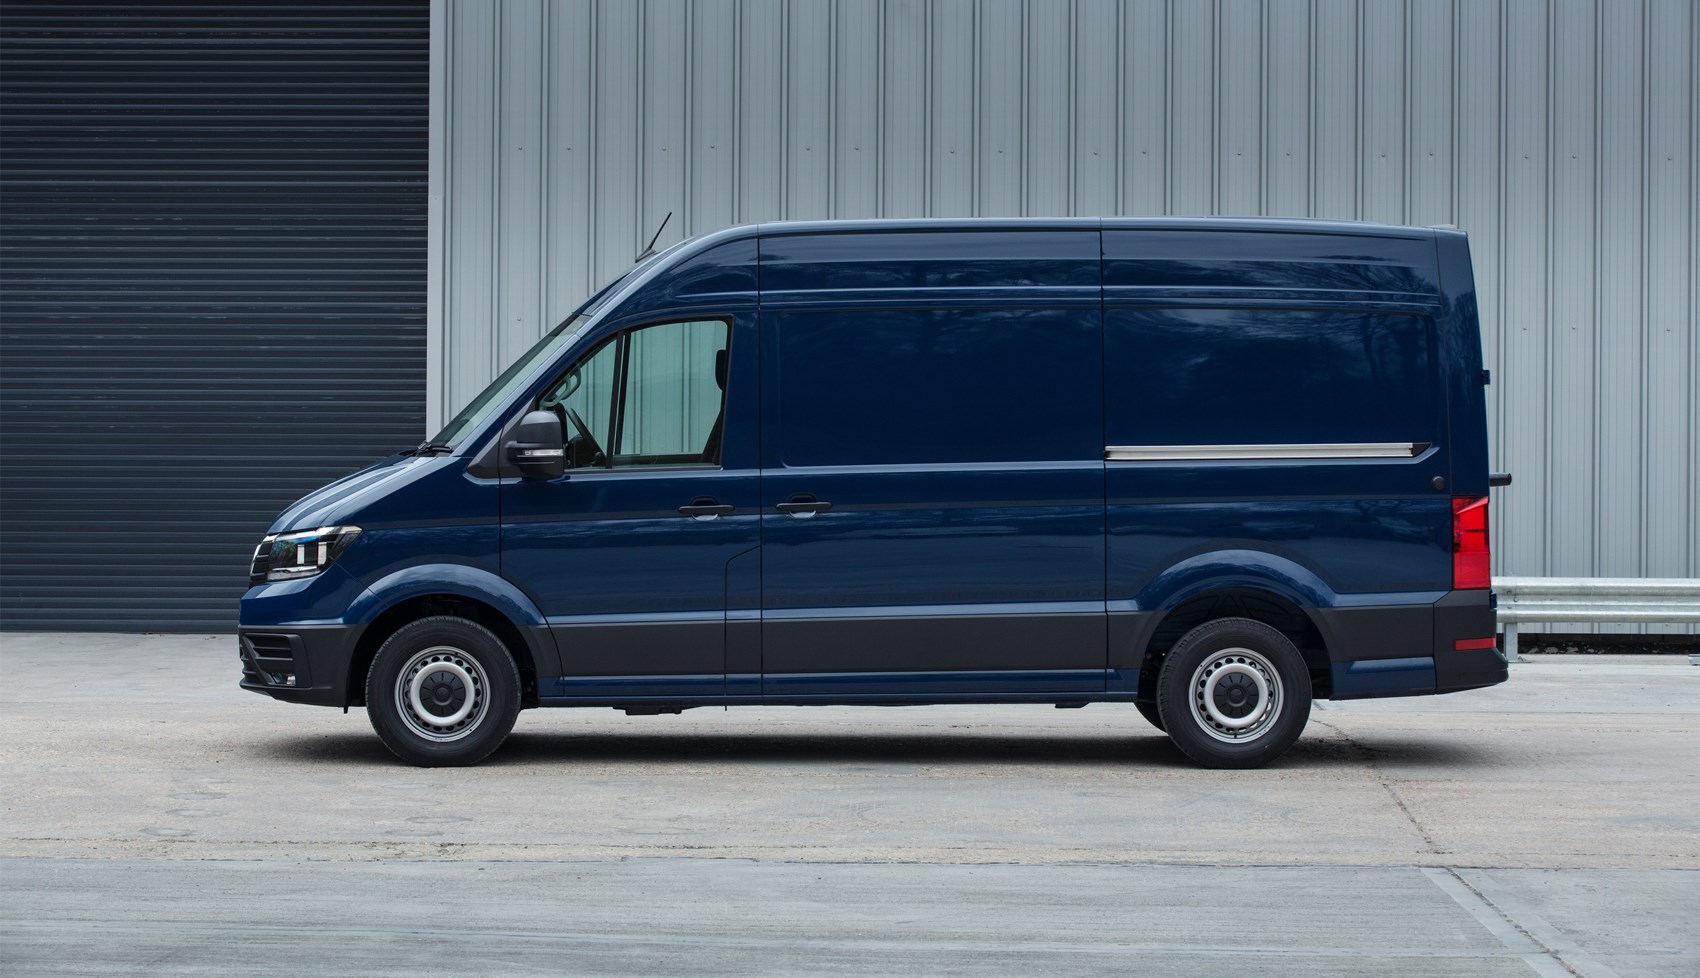 VW Crafter Review, For Sale, Colours, Specs, Interior & Models